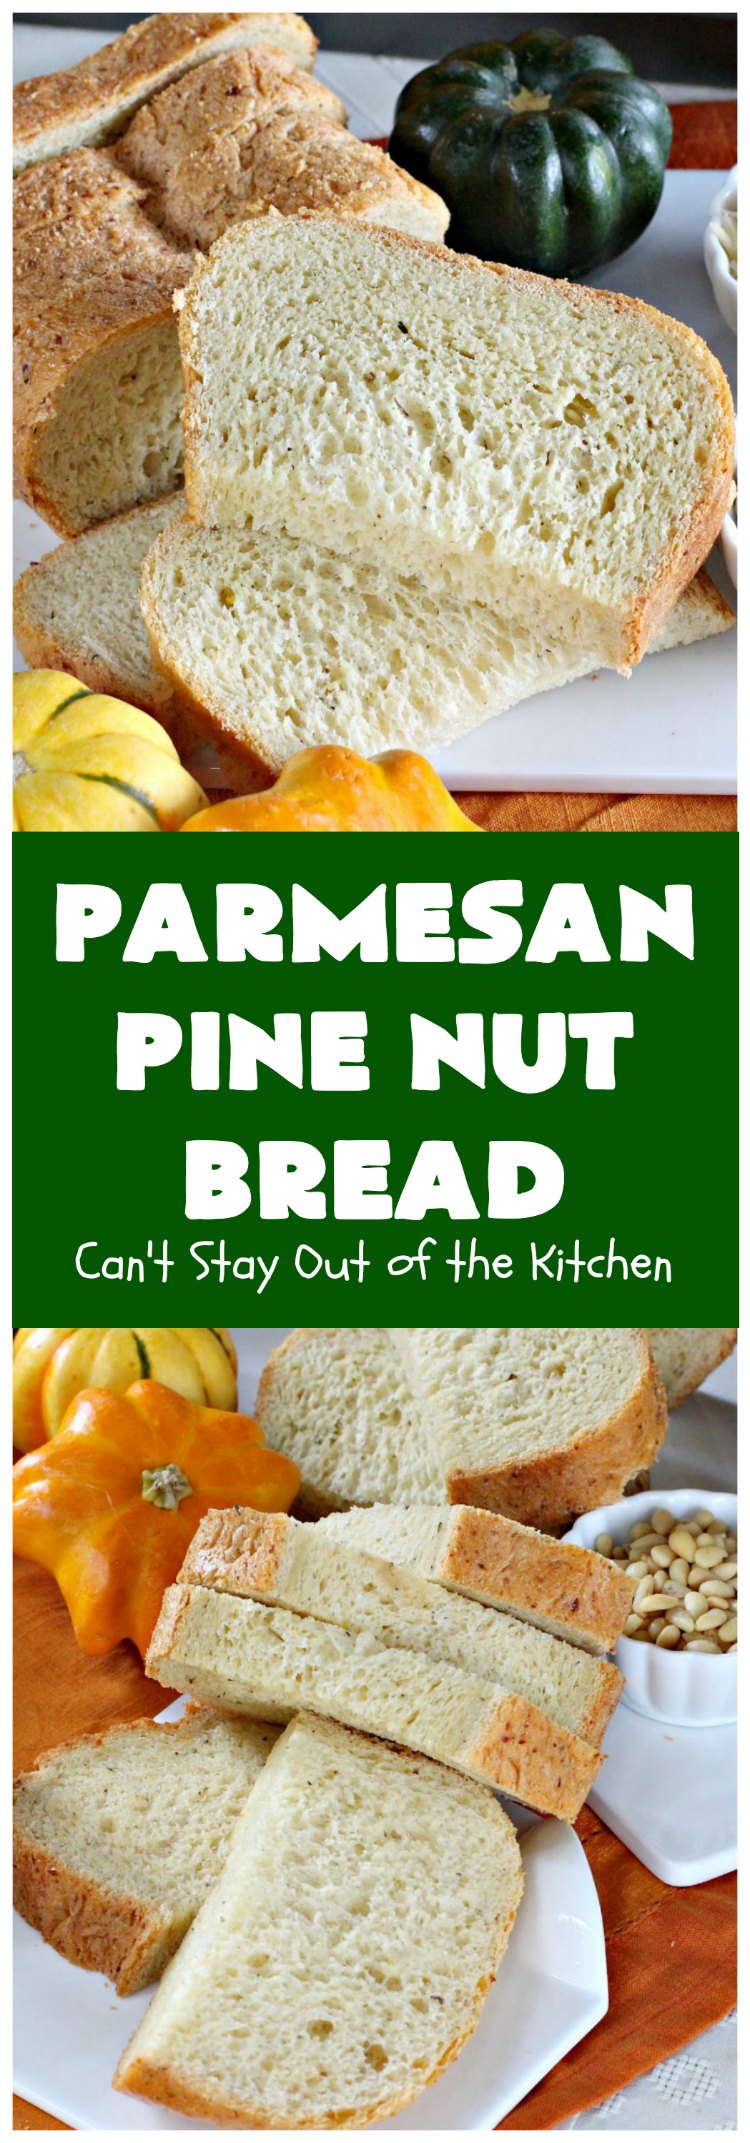 Parmesan Pine Nut Bread | Can't Stay Out of the Kitchen | this delicious #Italian style #bread is heavenly. It contains #PineNuts, #ItalianSeasoning & #ParmesanCheese. Because it's made in the #Breadmaker it's quick & easy to prepare. Terrific #DinnerBread for company or #holidays. #HomemadeBread #ParmesanPineNutBread 